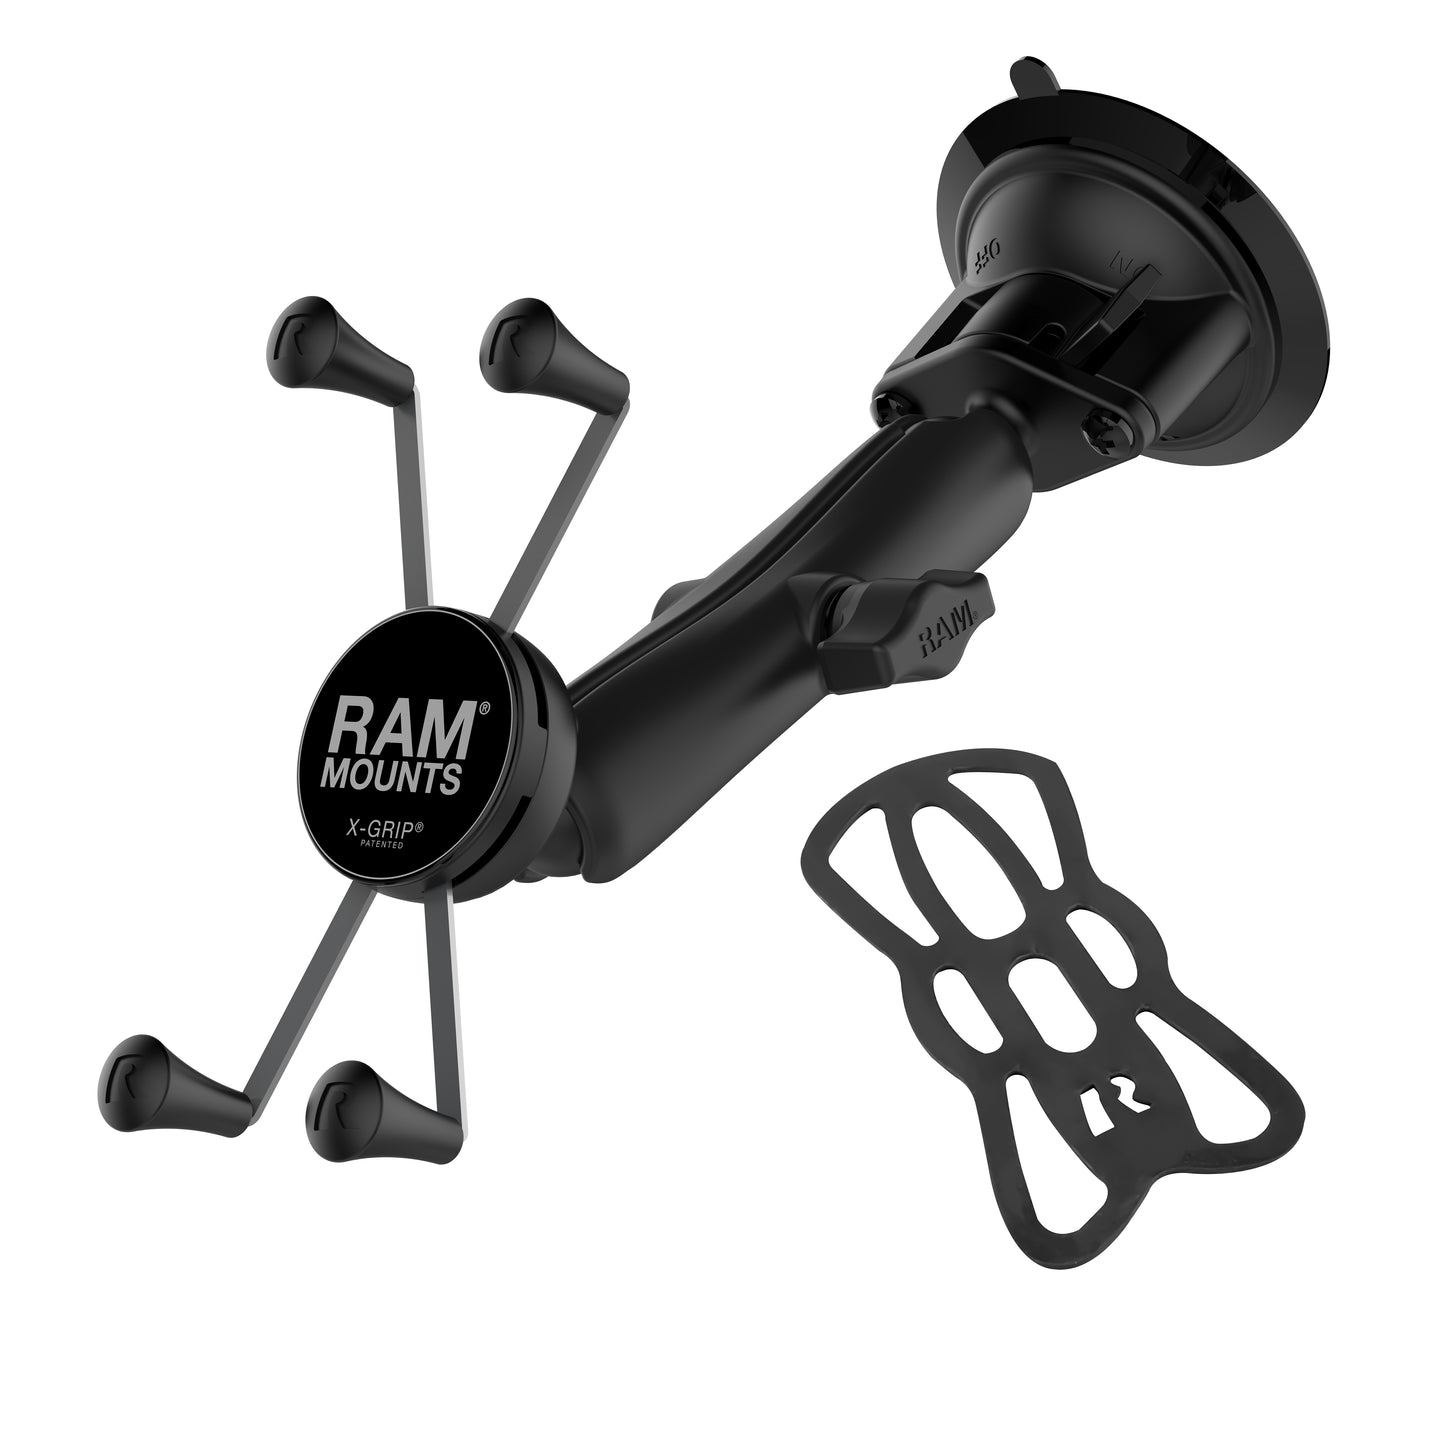 RAM Mounts X-Grip® Large Phone Mount with Twist-Lock™ Suction Cup - Long - image 3 of 3